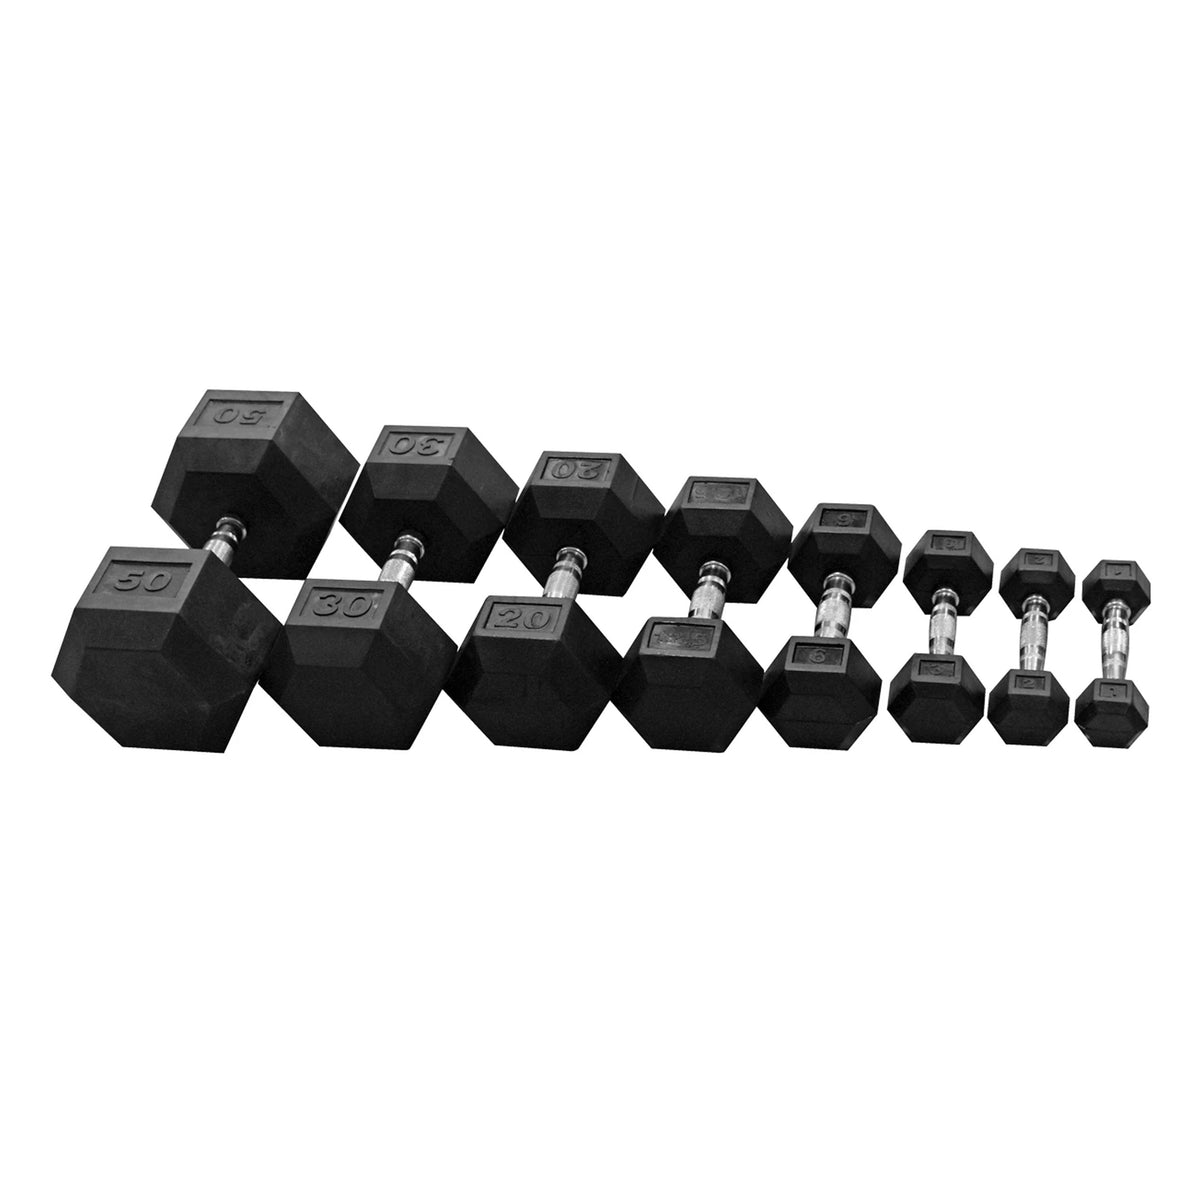 FitWay Equip. Rubber Hex Dumbbell Pair - 50lb